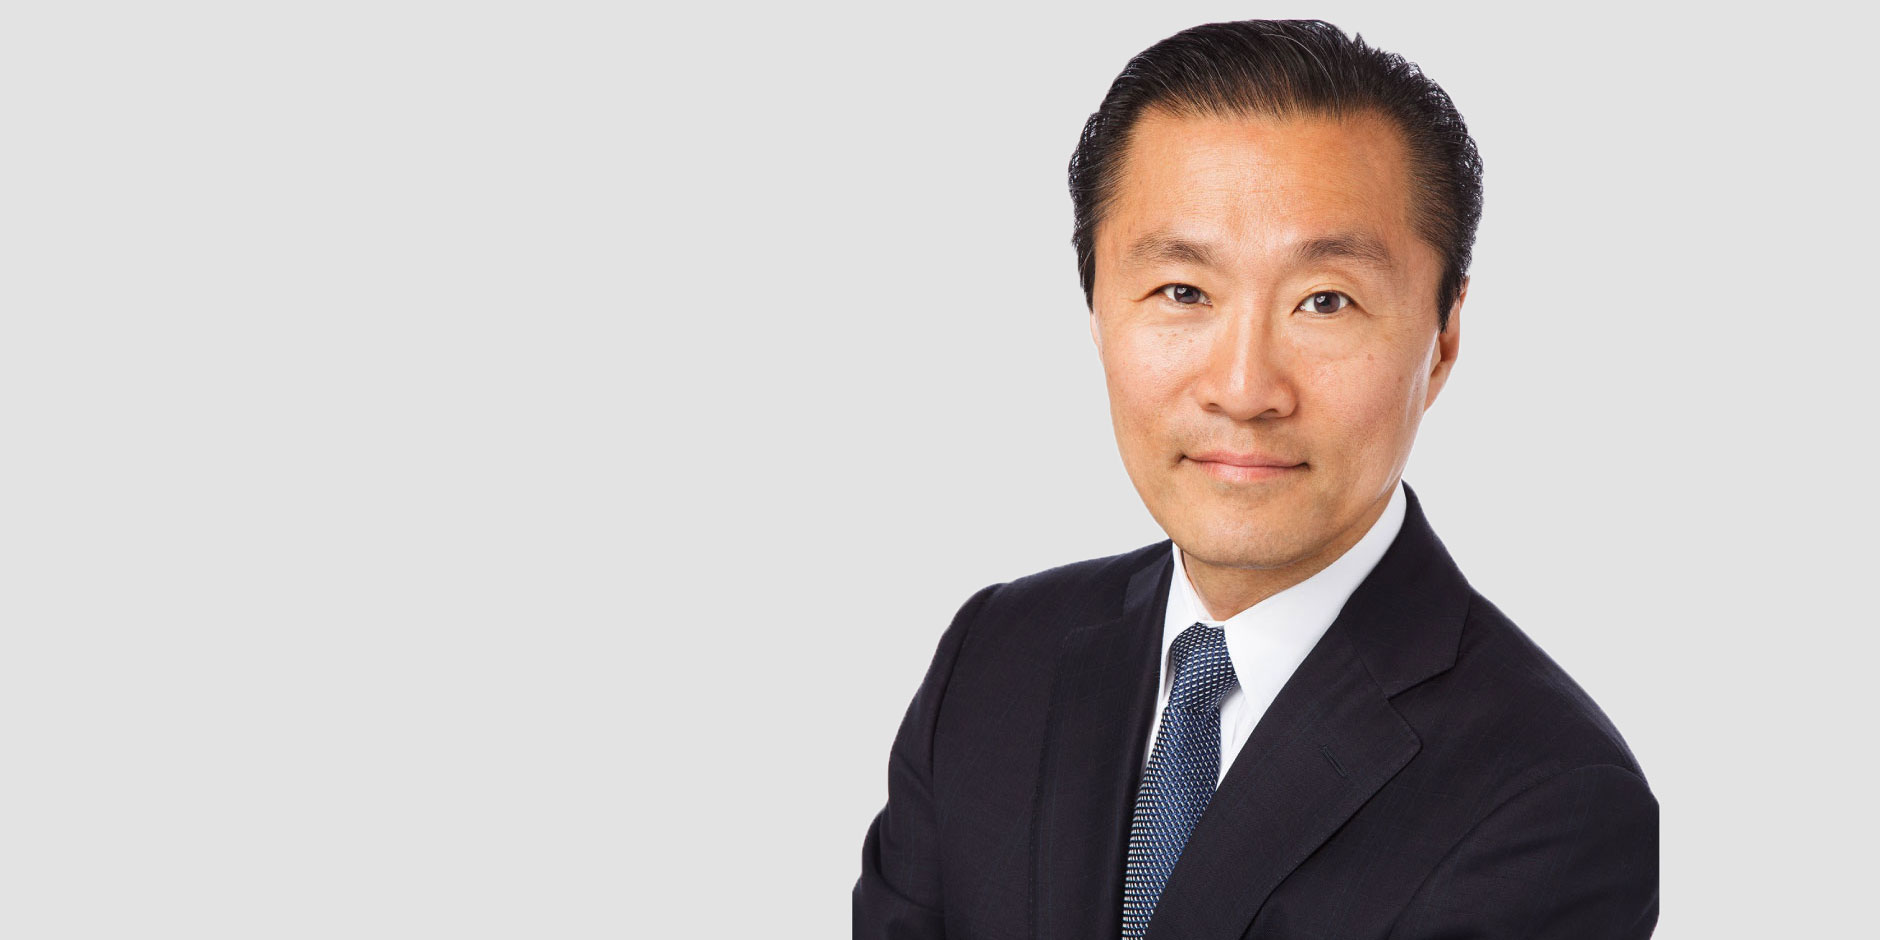 "Don Liu, in a dark suit and tie, looks at the camera against a grey background."